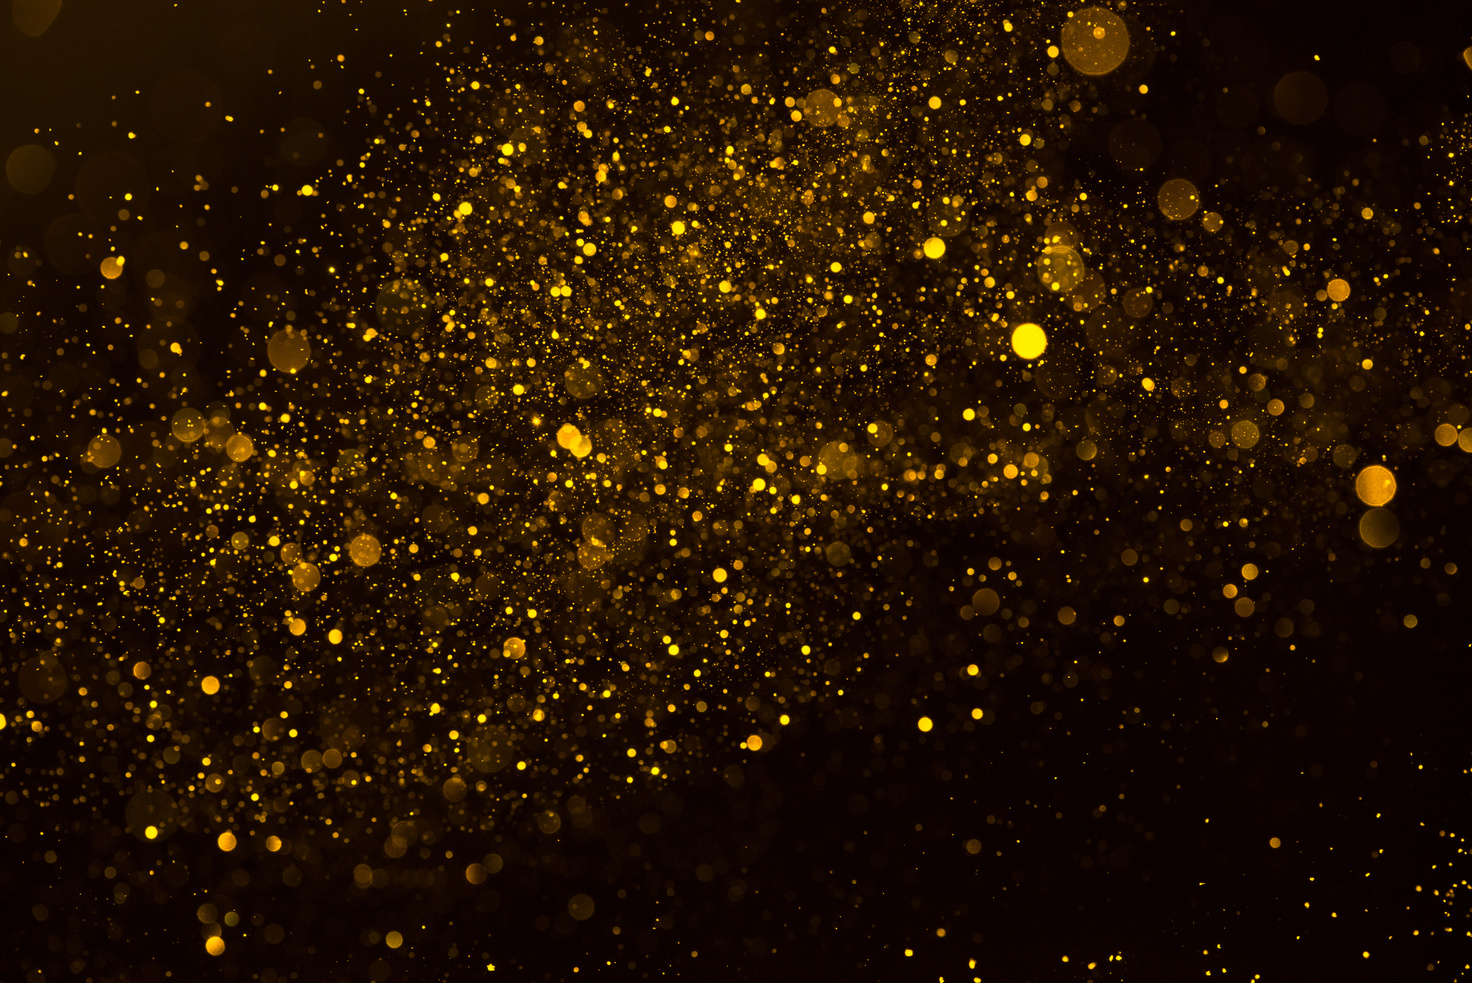 Magic glowing gold dust particles